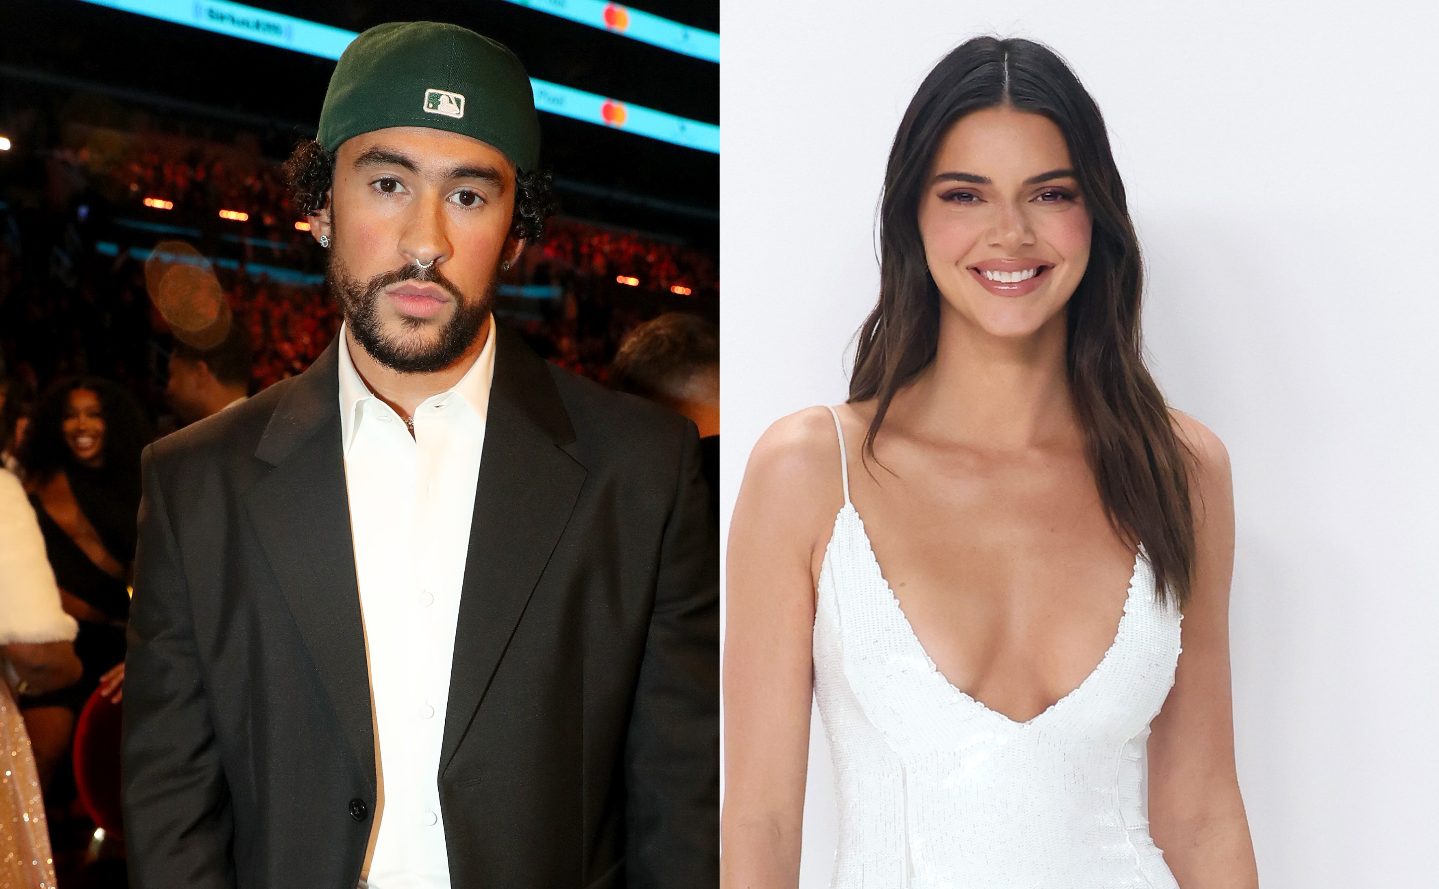 Supermodel Kendall Jenner and her current partner, Puerto Rican